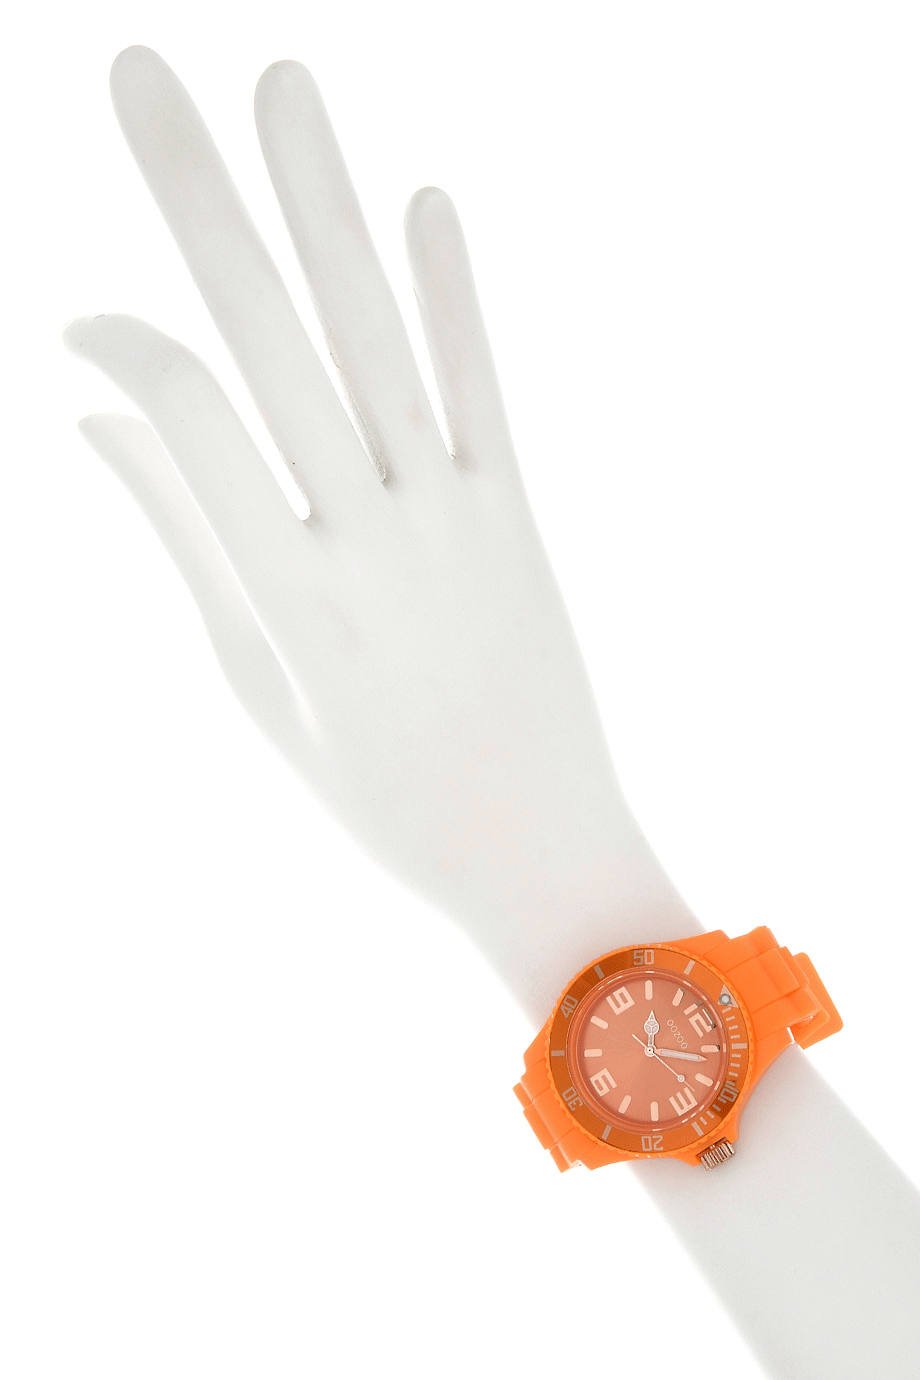 OOZOO FLUO Orange Silicone Watch